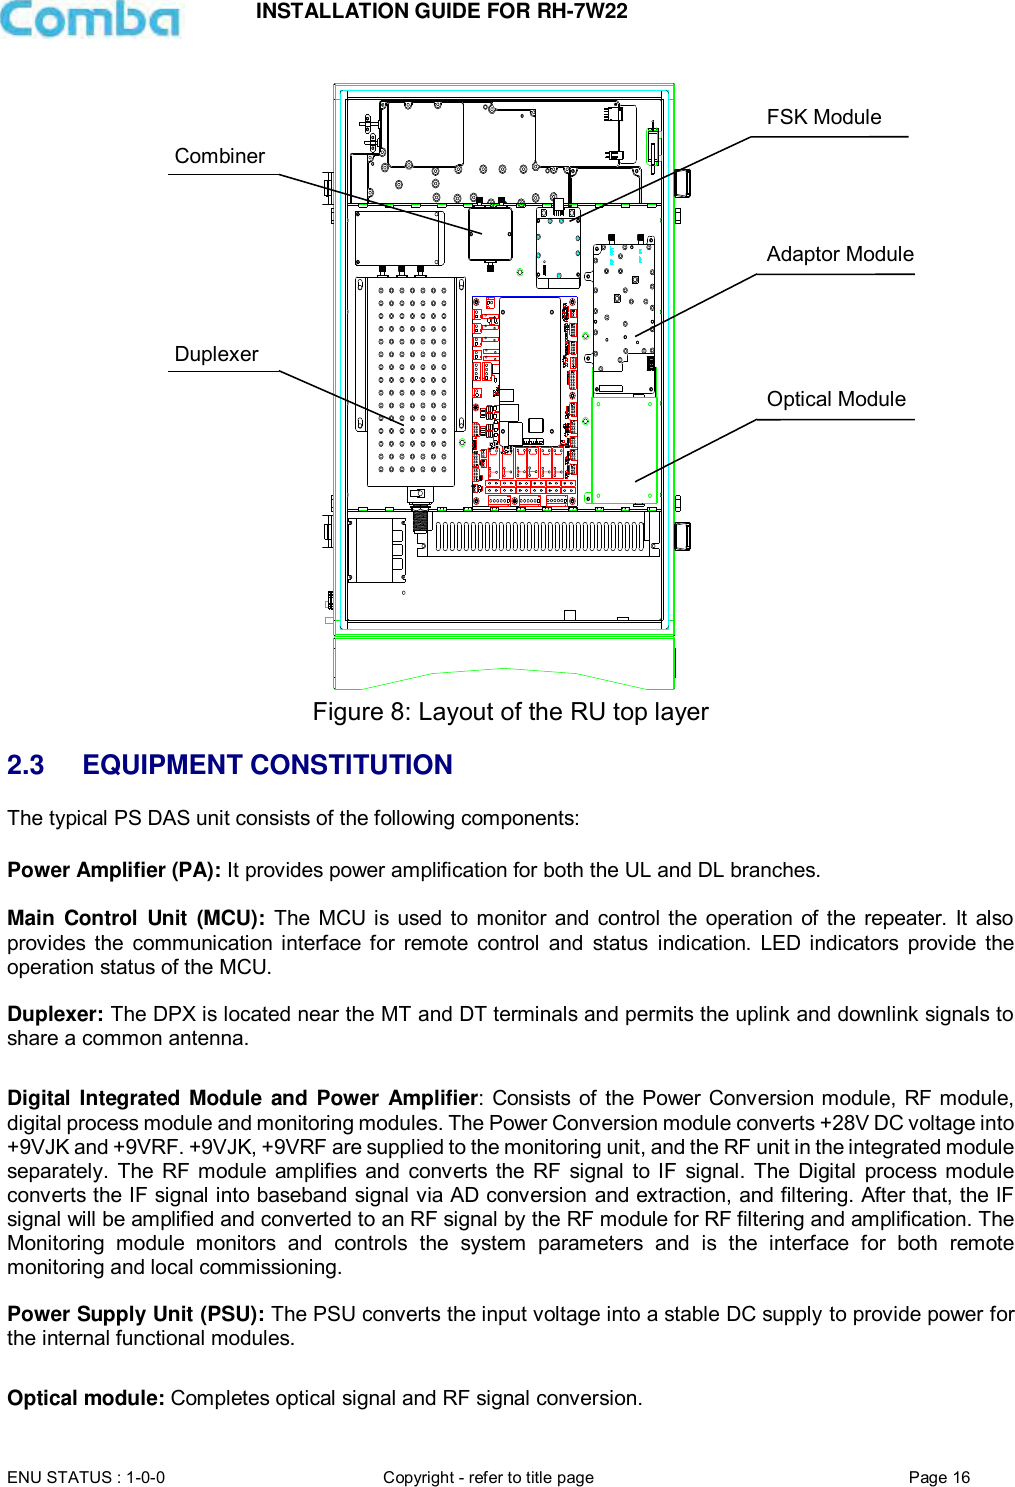 INSTALLATION GUIDE FOR RH-7W22  ENU STATUS : 1-0-0 Copyright - refer to title page Page 16      Figure 8: Layout of the RU top layer  2.3 EQUIPMENT CONSTITUTION The typical PS DAS unit consists of the following components:   Power Amplifier (PA): It provides power amplification for both the UL and DL branches.   Main Control  Unit  (MCU): The MCU is used to monitor  and control the  operation of  the repeater.  It  also provides  the  communication interface  for  remote  control  and  status indication.  LED  indicators  provide  the operation status of the MCU.  Duplexer: The DPX is located near the MT and DT terminals and permits the uplink and downlink signals to share a common antenna.  Digital Integrated Module and Power Amplifier: Consists  of the Power Conversion module, RF module, digital process module and monitoring modules. The Power Conversion module converts +28V DC voltage into +9VJK and +9VRF. +9VJK, +9VRF are supplied to the monitoring unit, and the RF unit in the integrated module separately.  The  RF module  amplifies and  converts  the RF signal  to IF  signal.  The  Digital  process module converts the IF signal into baseband signal via AD conversion and extraction, and filtering. After that, the IF signal will be amplified and converted to an RF signal by the RF module for RF filtering and amplification. The Monitoring  module  monitors  and  controls  the  system  parameters  and  is  the  interface  for  both  remote monitoring and local commissioning.  Power Supply Unit (PSU): The PSU converts the input voltage into a stable DC supply to provide power for the internal functional modules.  Optical module: Completes optical signal and RF signal conversion.  Optical Module Adaptor Module FSK Module Duplexer Combiner 